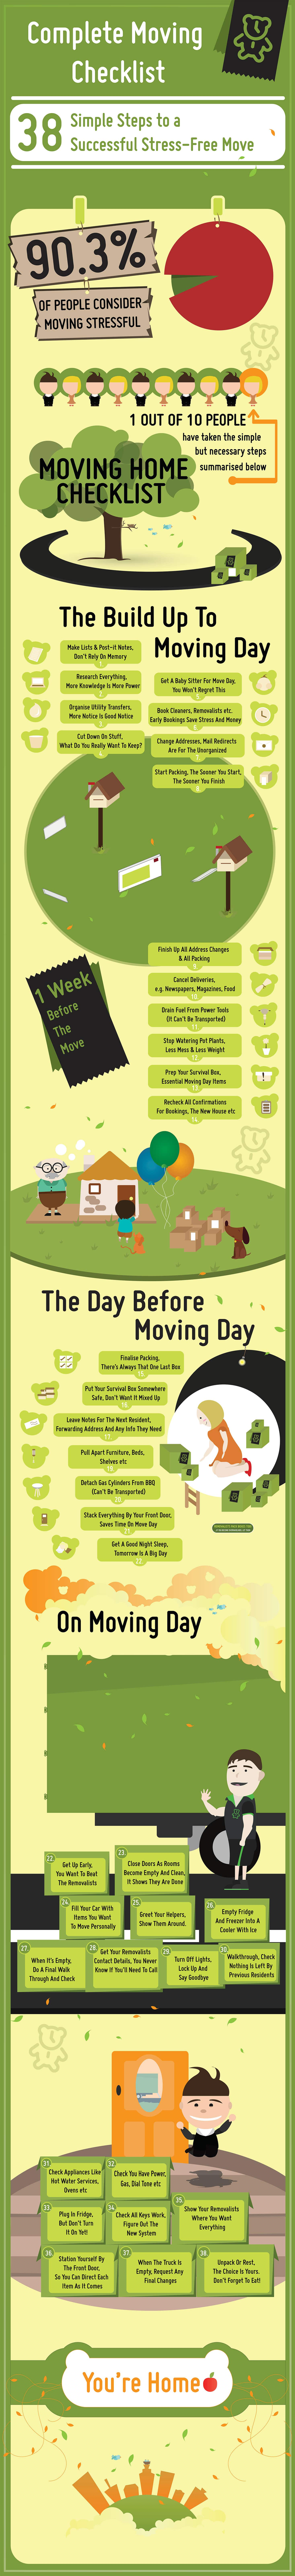 moving-home-checklist-infographic